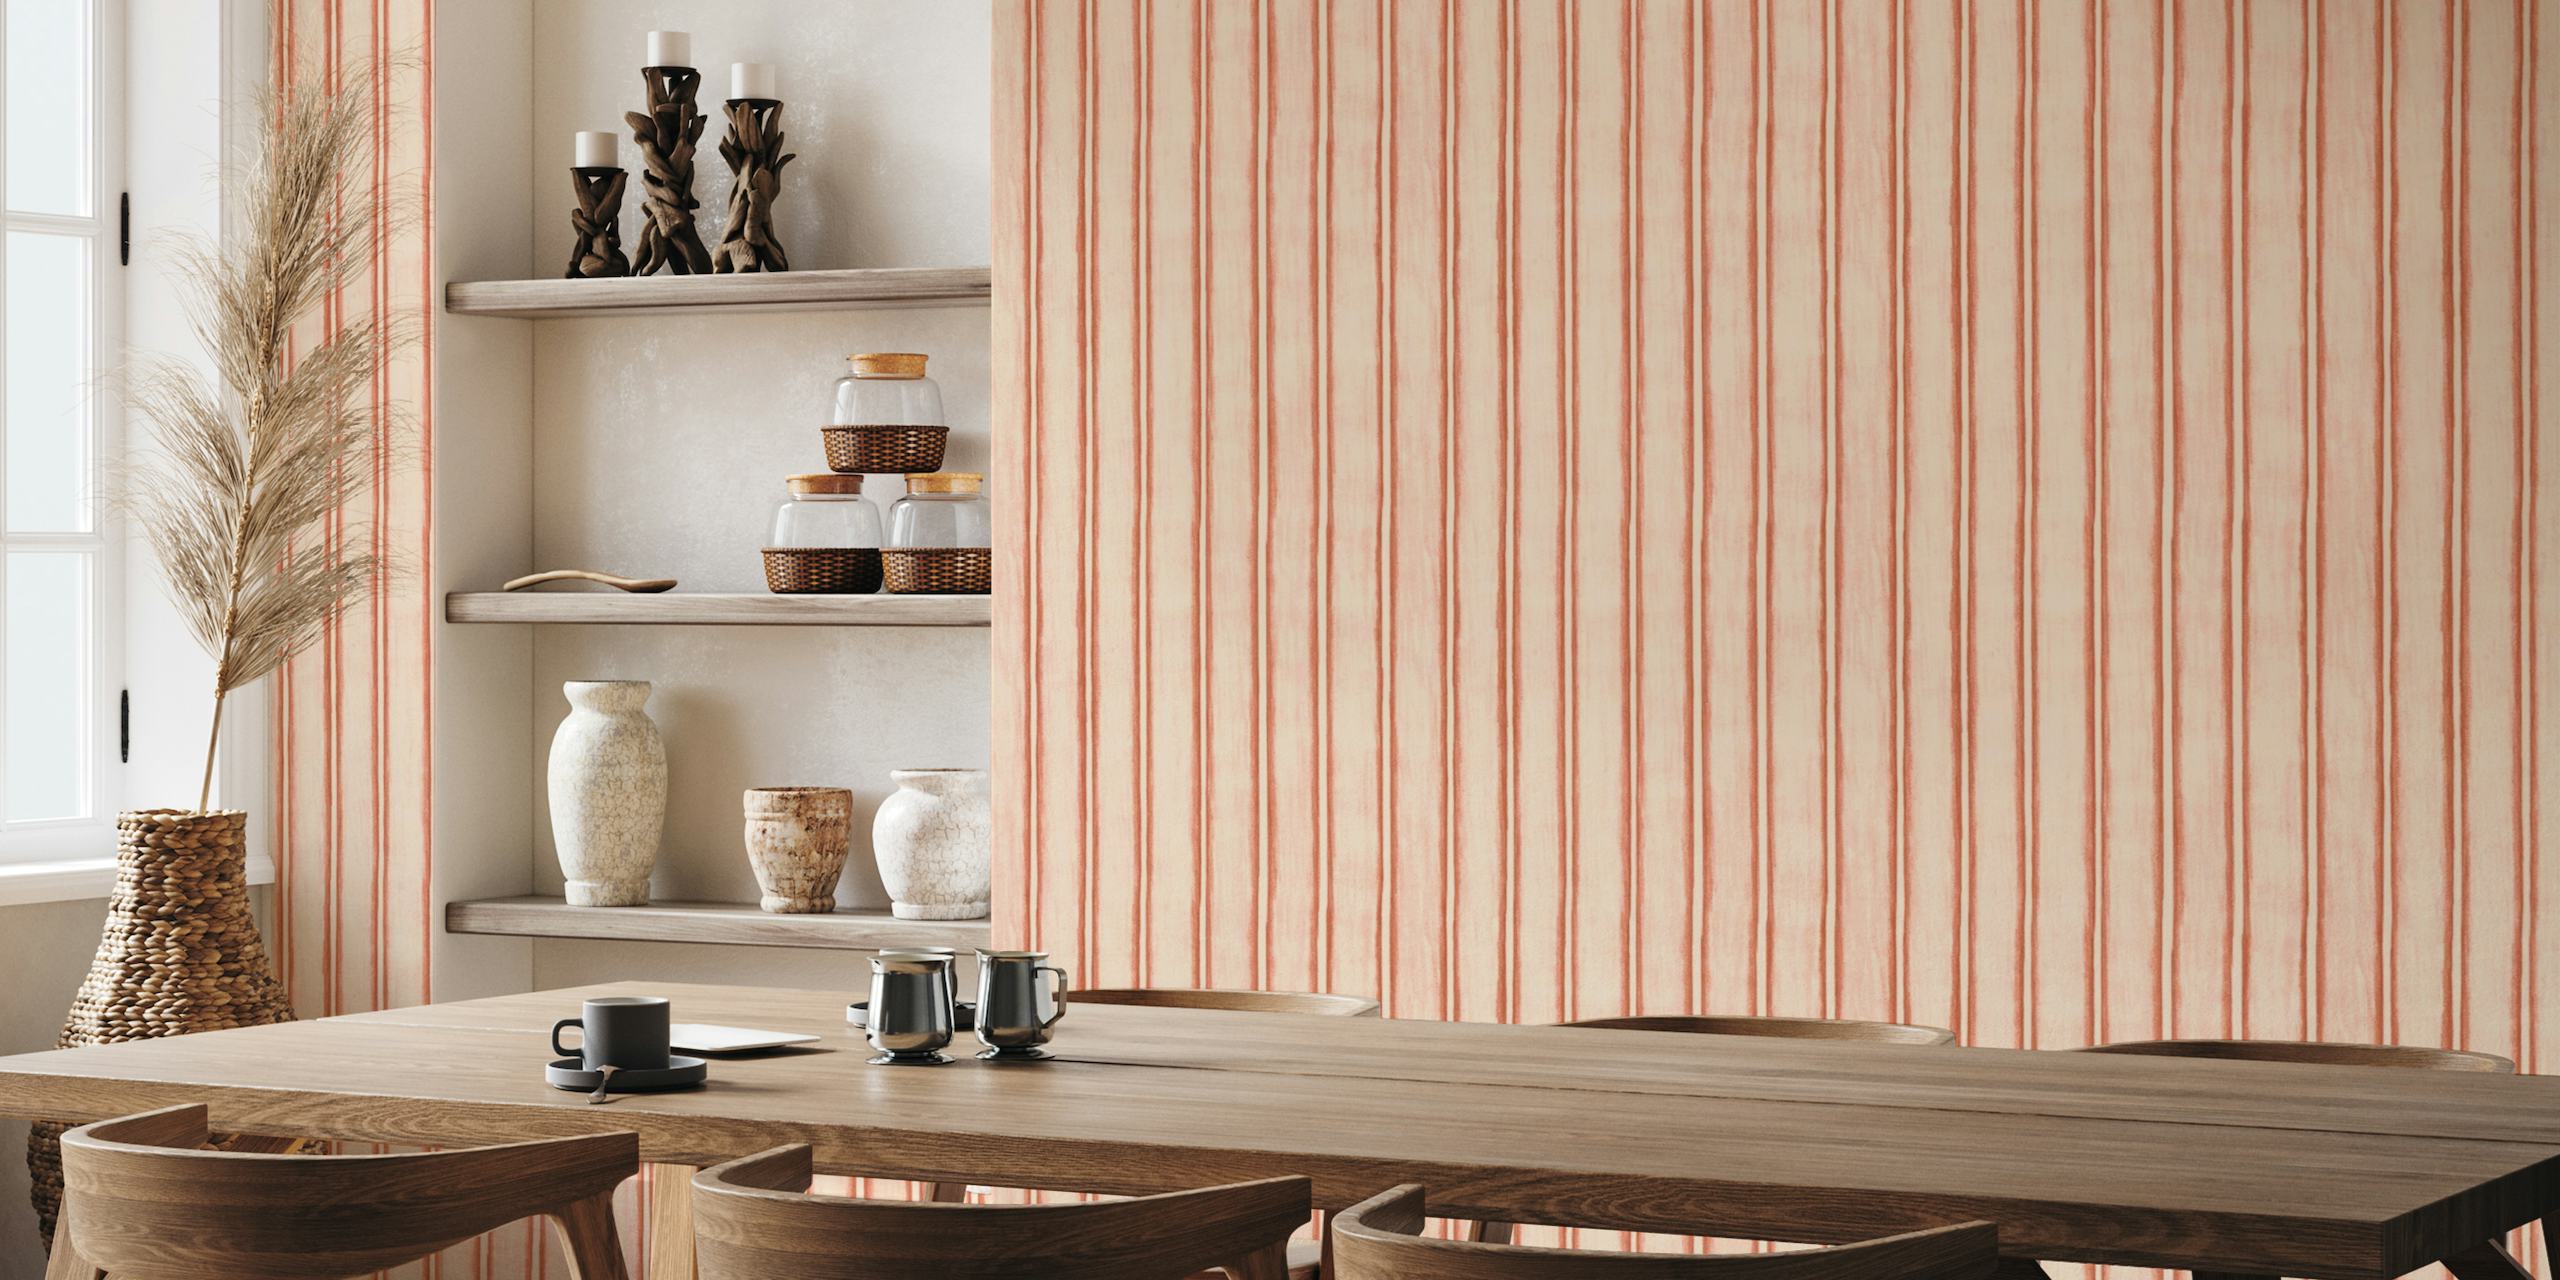 Dusty Tangerine Chalky Stripes wall mural with vertical patterns